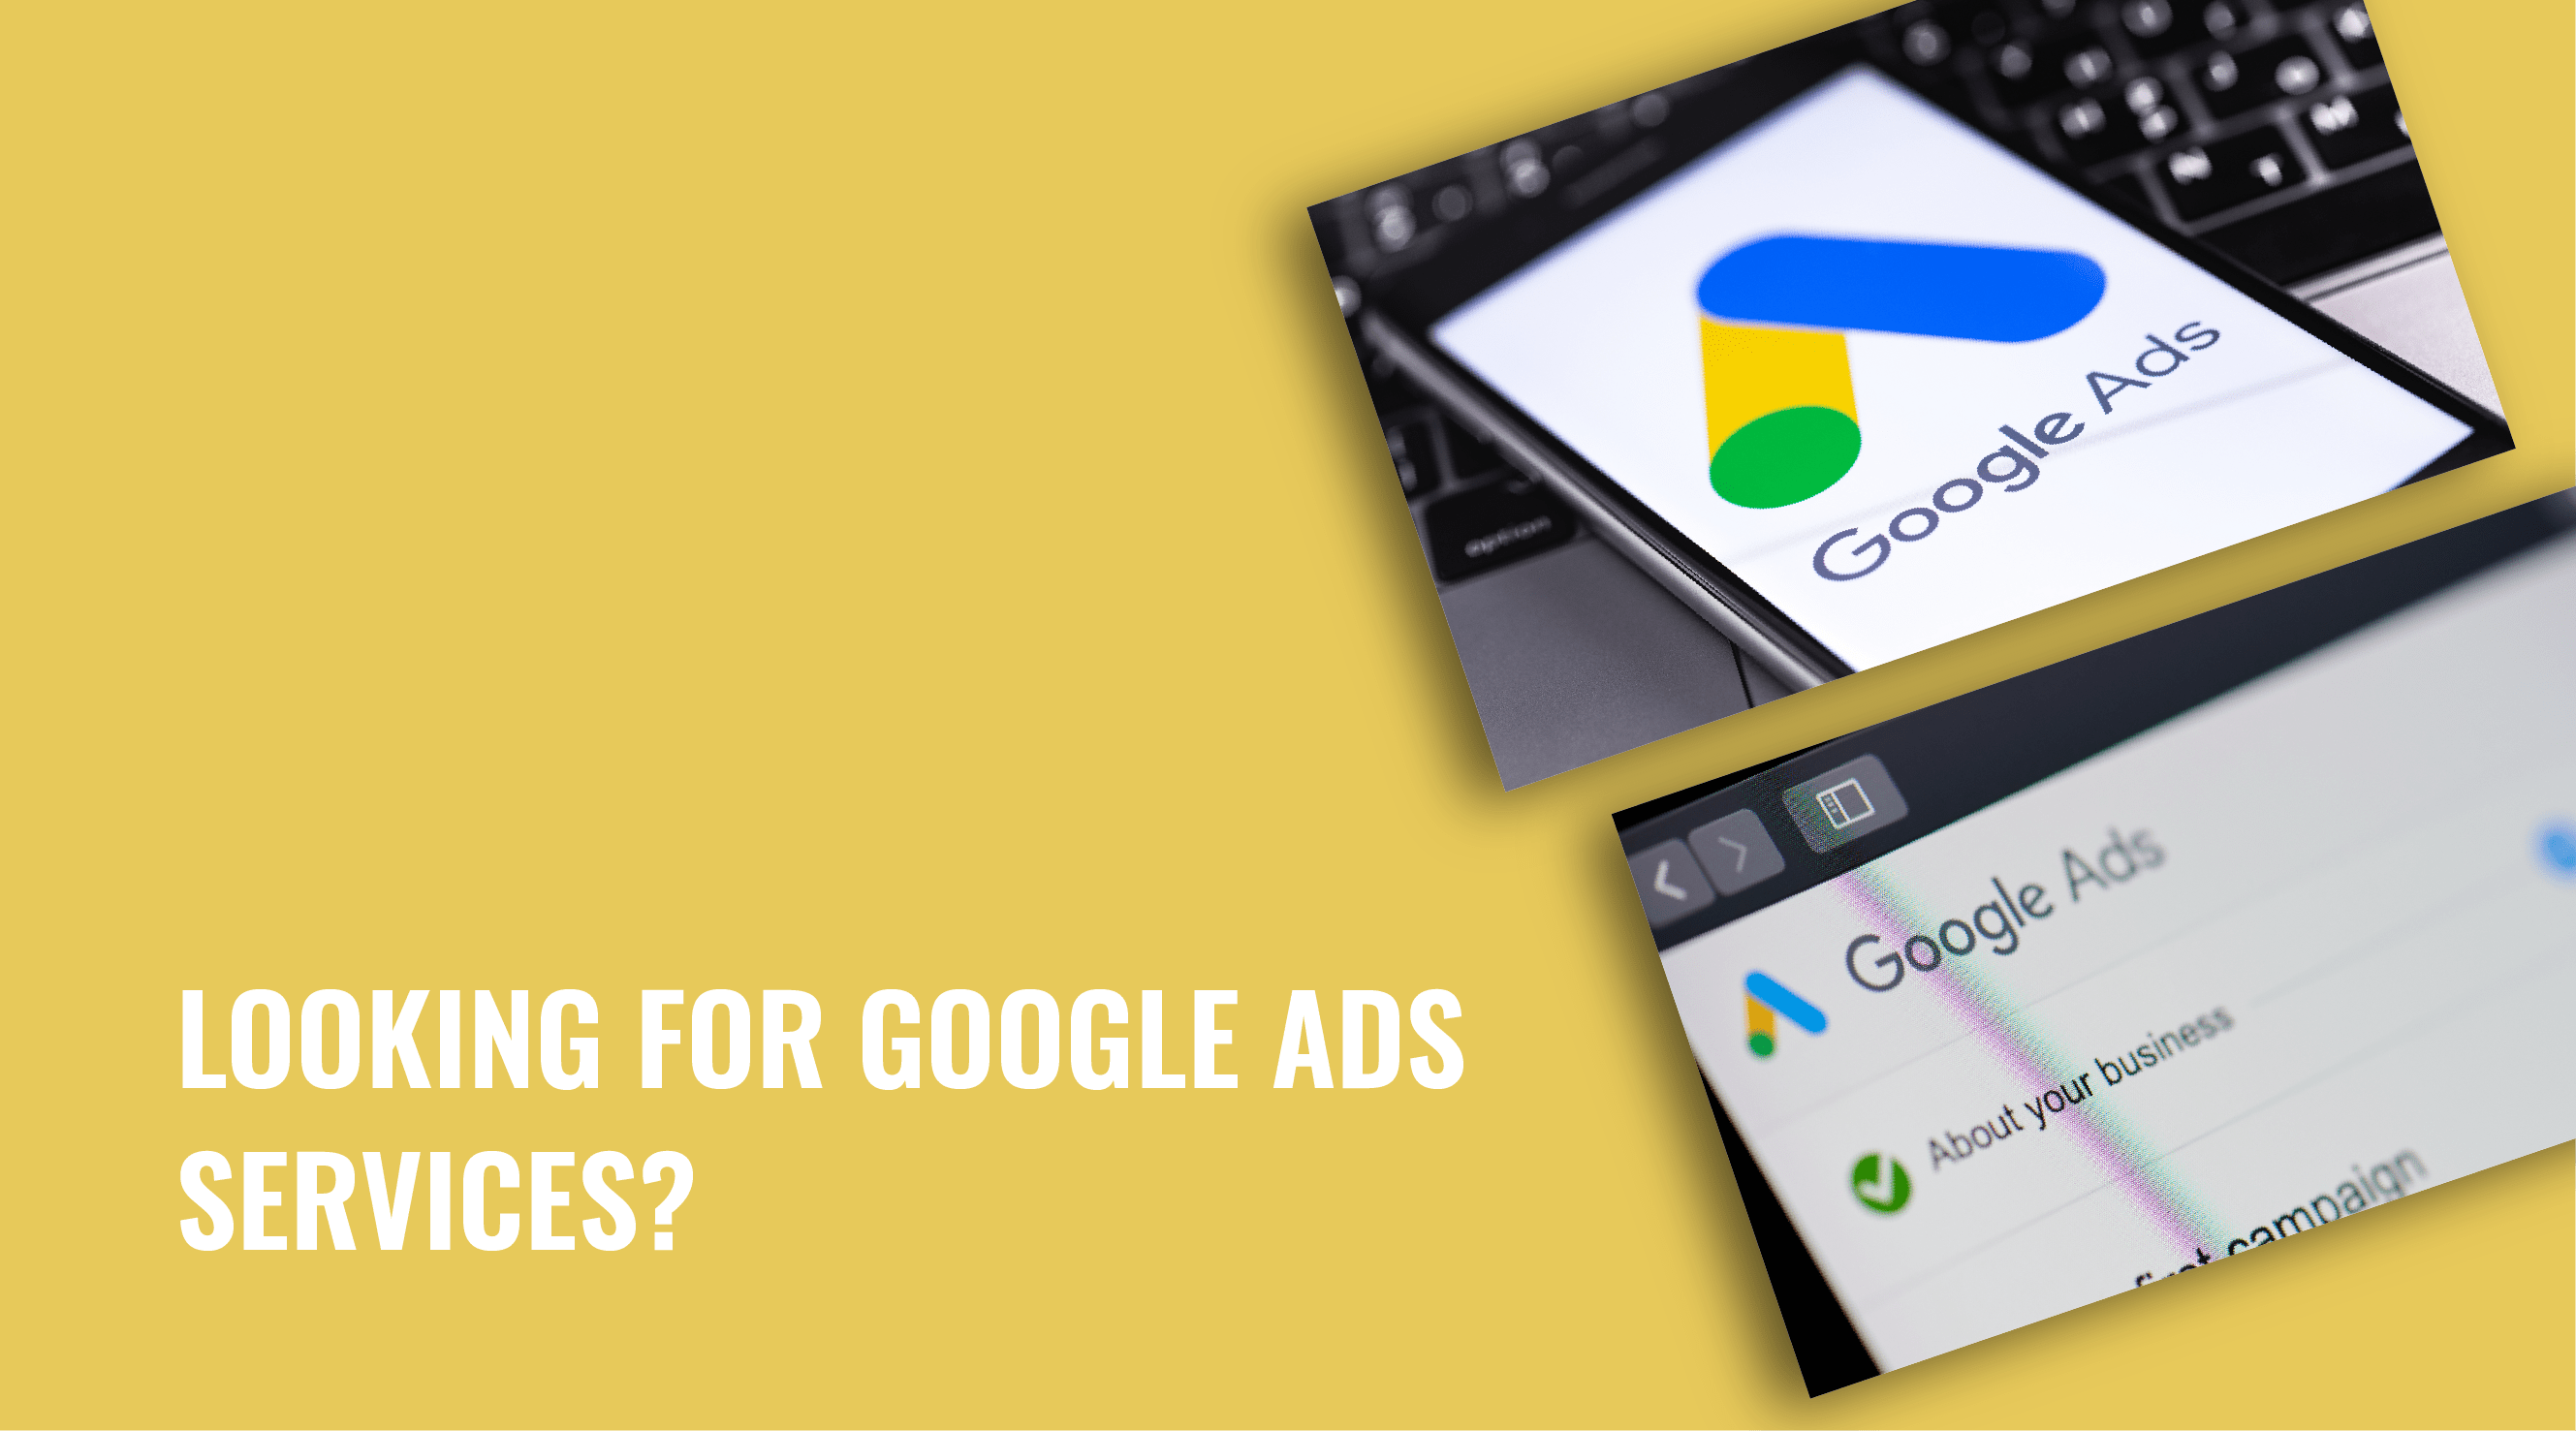 Are You Looking For Google Ads Services But Don’t Know Where to Start?